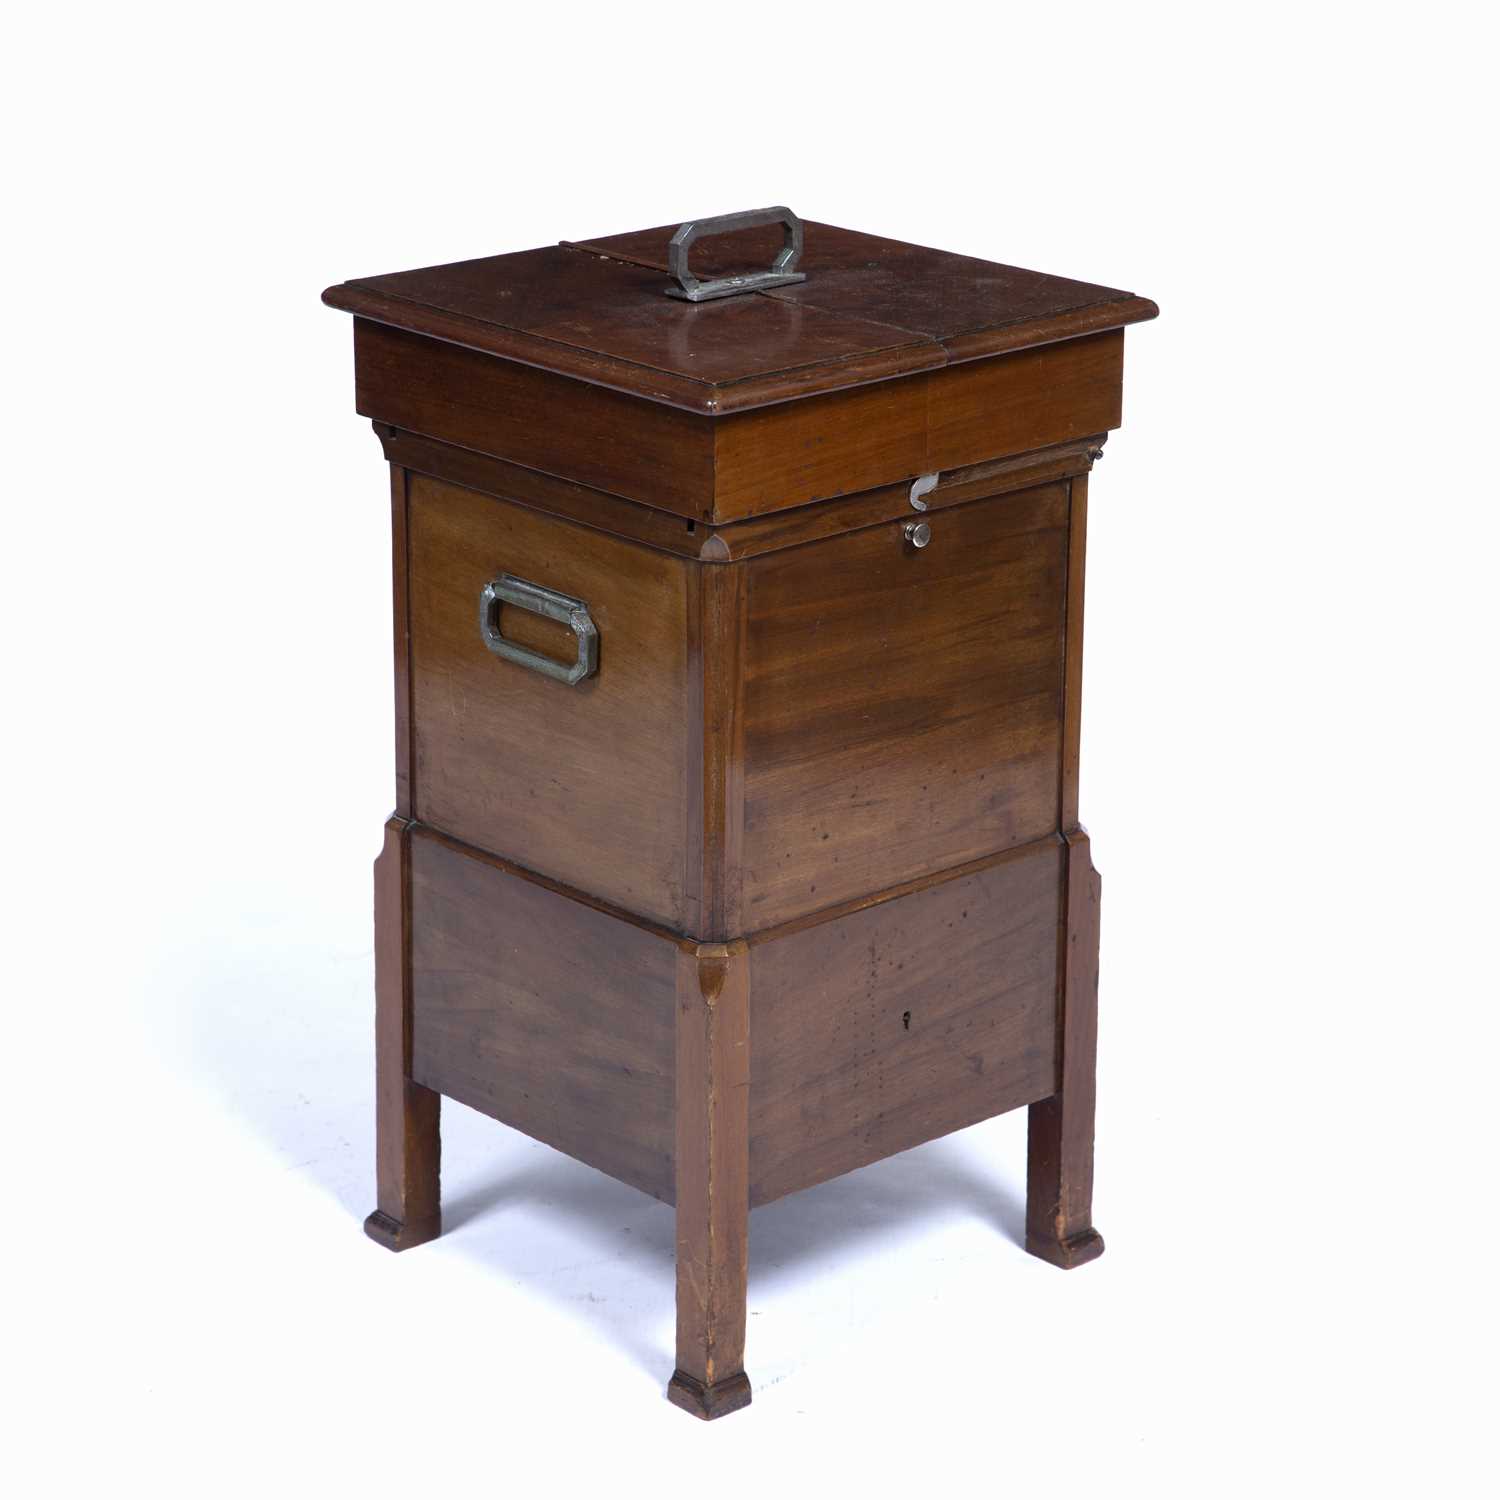 Asprey mahogany 'Elevette' rising drinks table 20th Century, with a central rising tantalus to the - Image 4 of 8